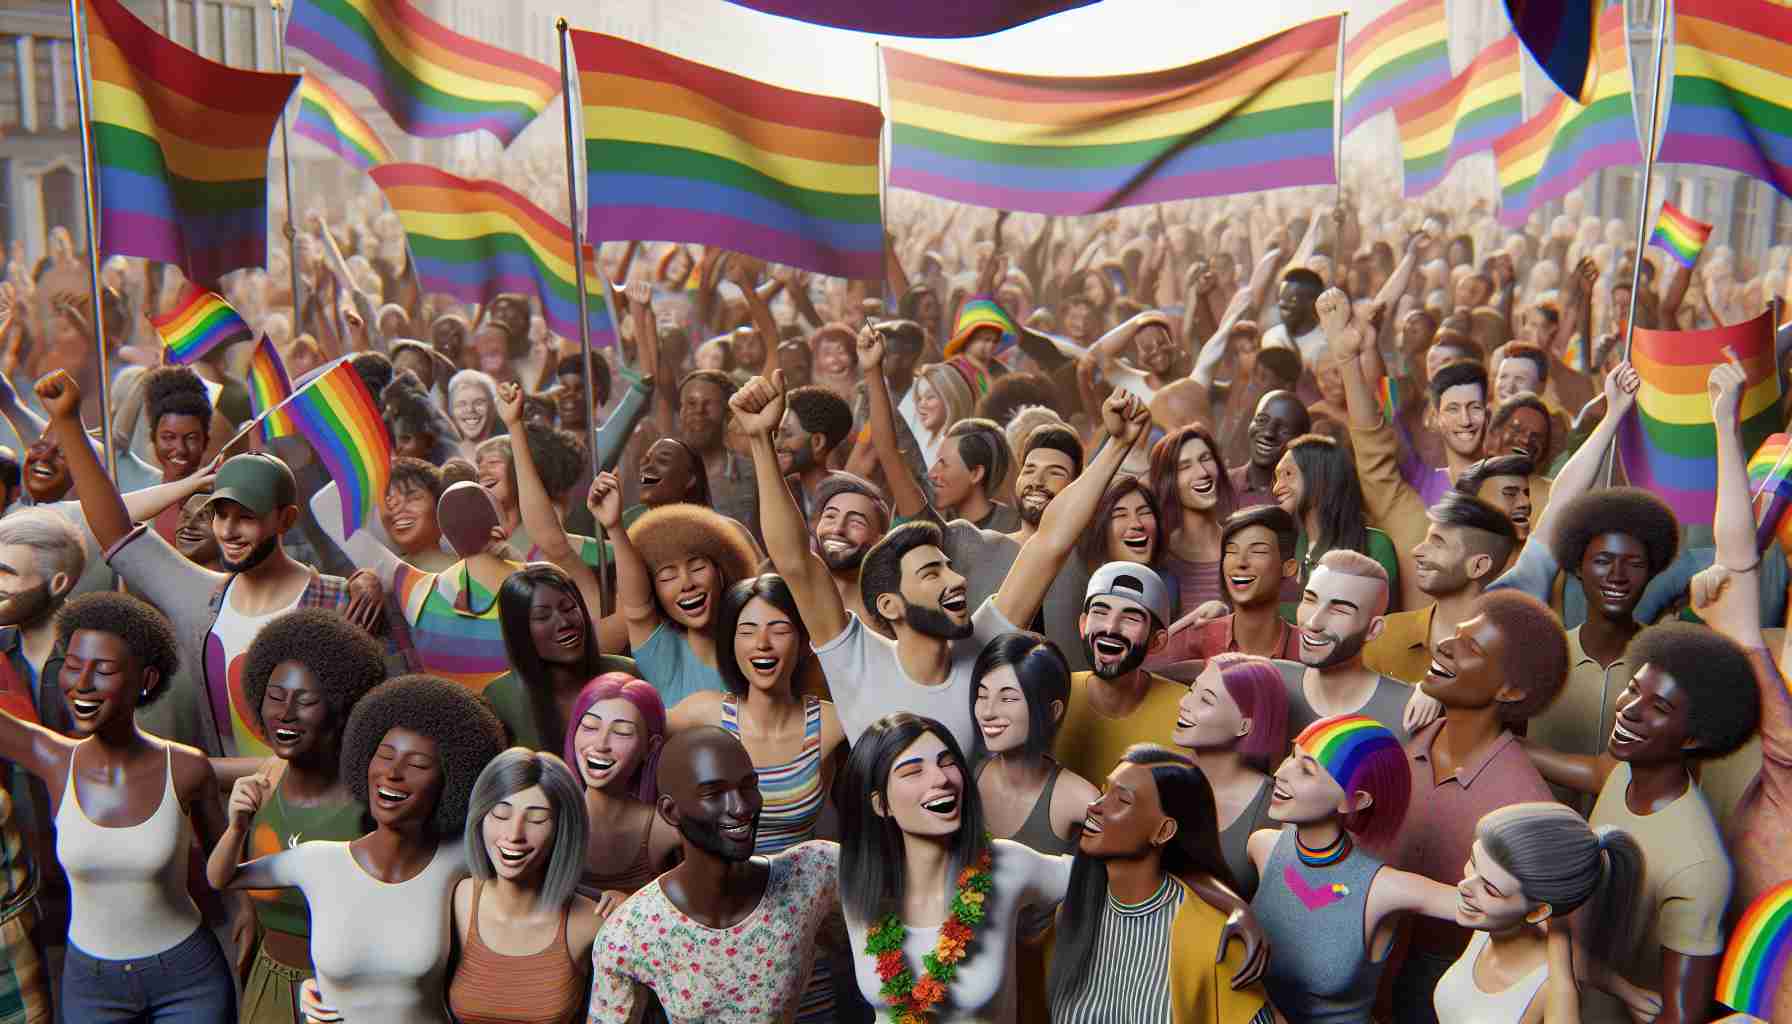 A high-definition, realistic image of a celebration embracing LGBTQ rights and inclusion. The scene unfolds in a lively environment, with rainbow flags waving proudly. A parade is in progress, with people of diverse backgrounds, genders, and ages participating enthusiastically. Each person is represented equally and harmoniously, reflecting a broad spectrum of descents such as Caucasian, Hispanic, Black, Middle-Eastern, South Asian, and East Asian. Heart-warming smiles, loving gestures, and vibrant outfits contribute to the jubilant spirit of the gathering.